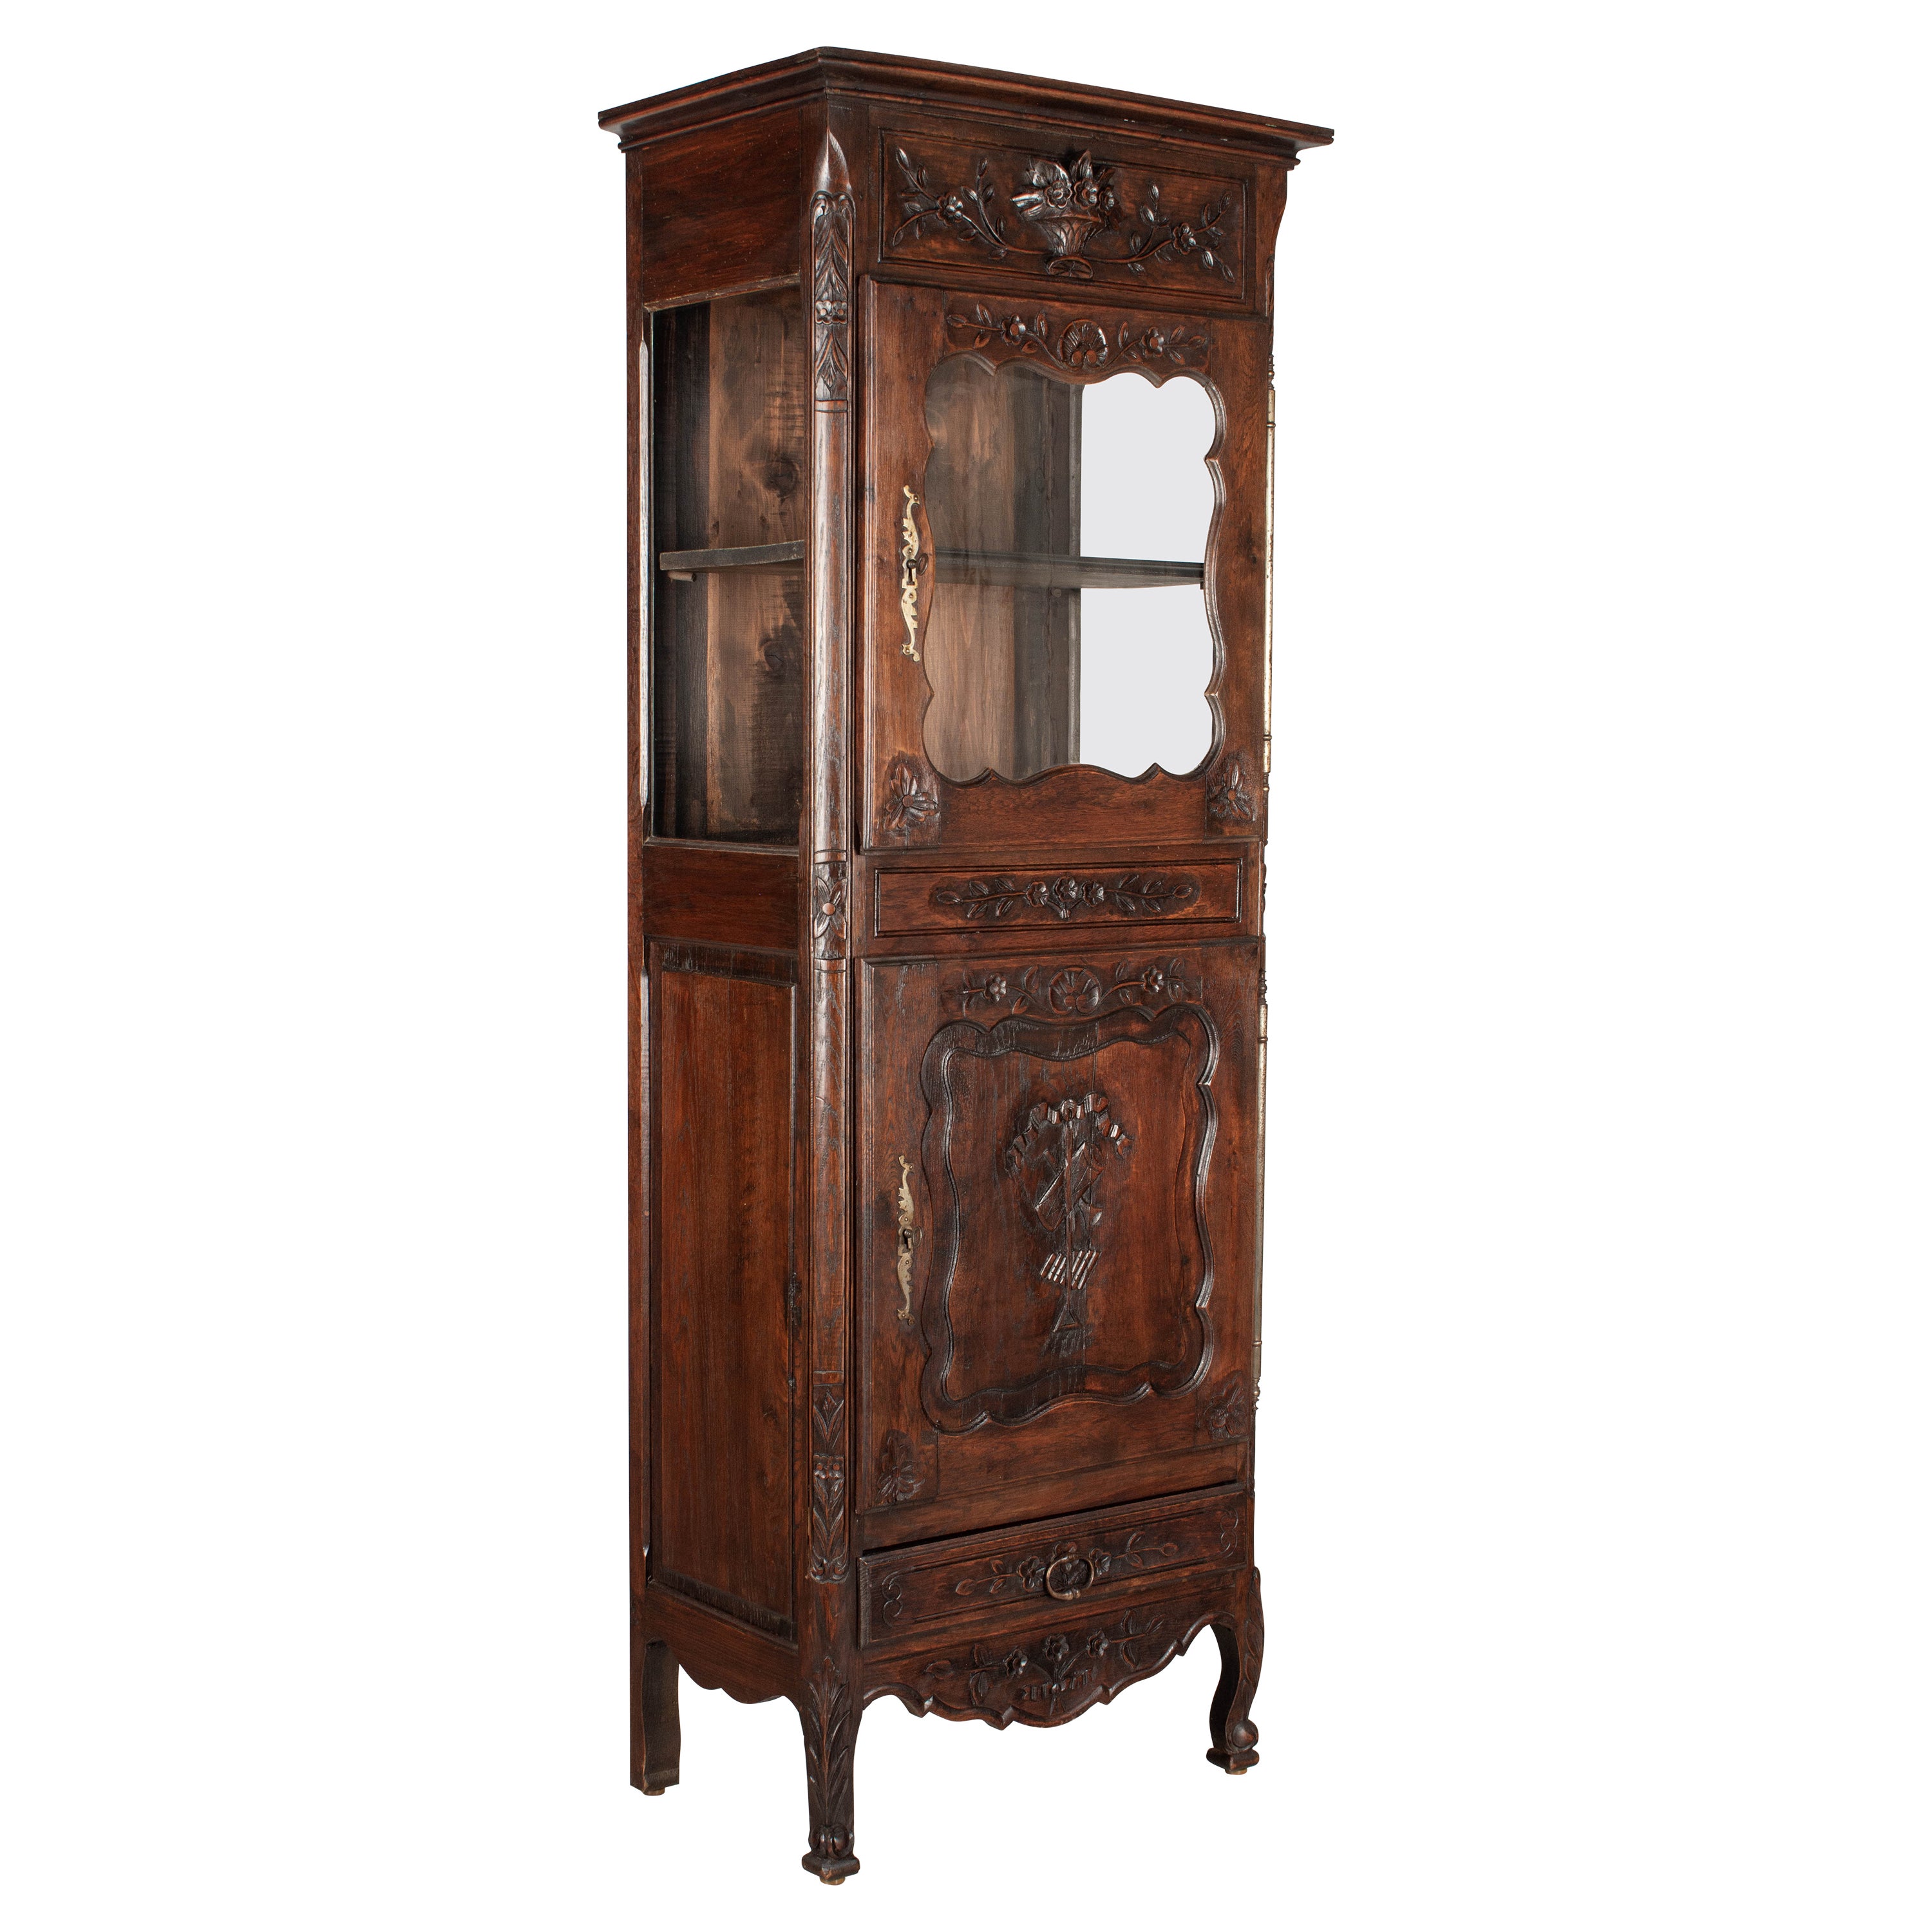 French Louis XV Style Bonnetiére or Display Cabinet